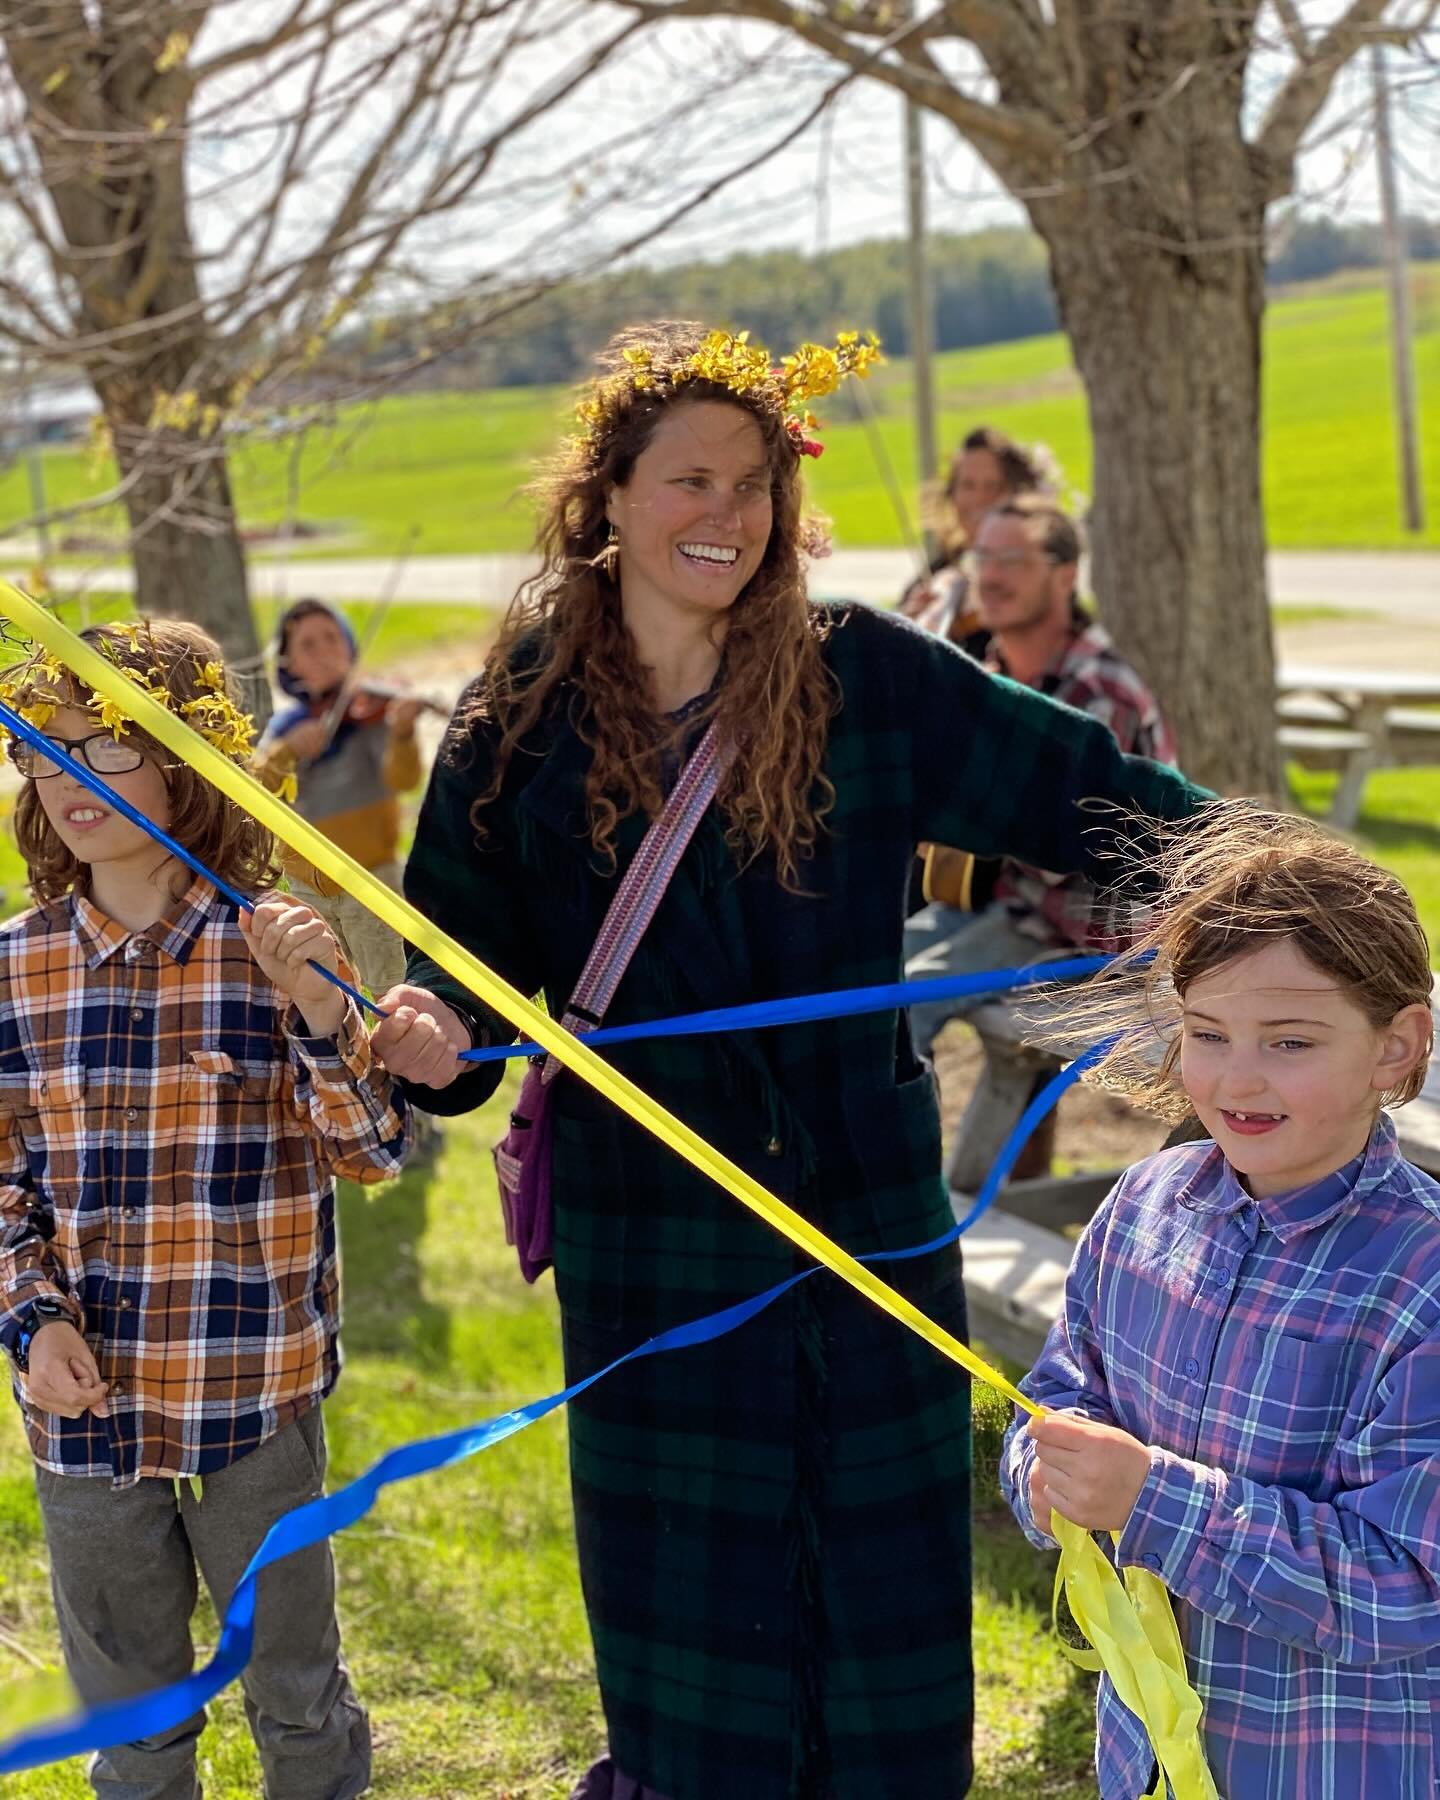 Here are some streamers of pink, yellow, blue
A reminder of spring and things that are new 
Together they make a maypole for you
And a wish for a Happy May Day too!

Happy May Day!
Maypole at 4:30 today